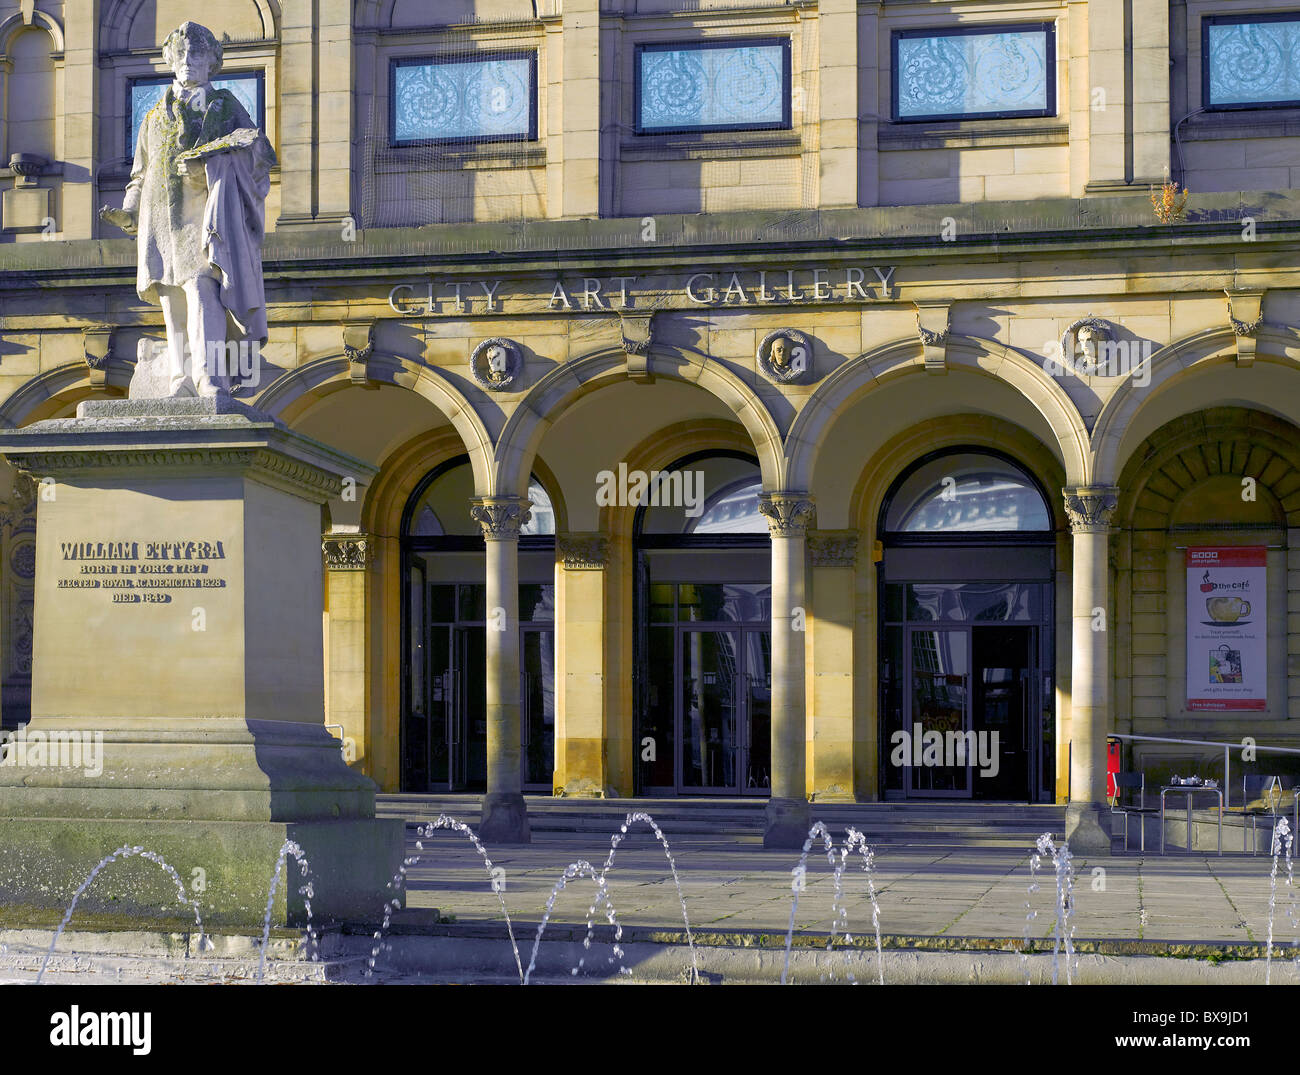 Statue of William Etty outside the City Art Gallery Exhibition Square York North Yorkshire England UK United Kingdom GB Stock Photo